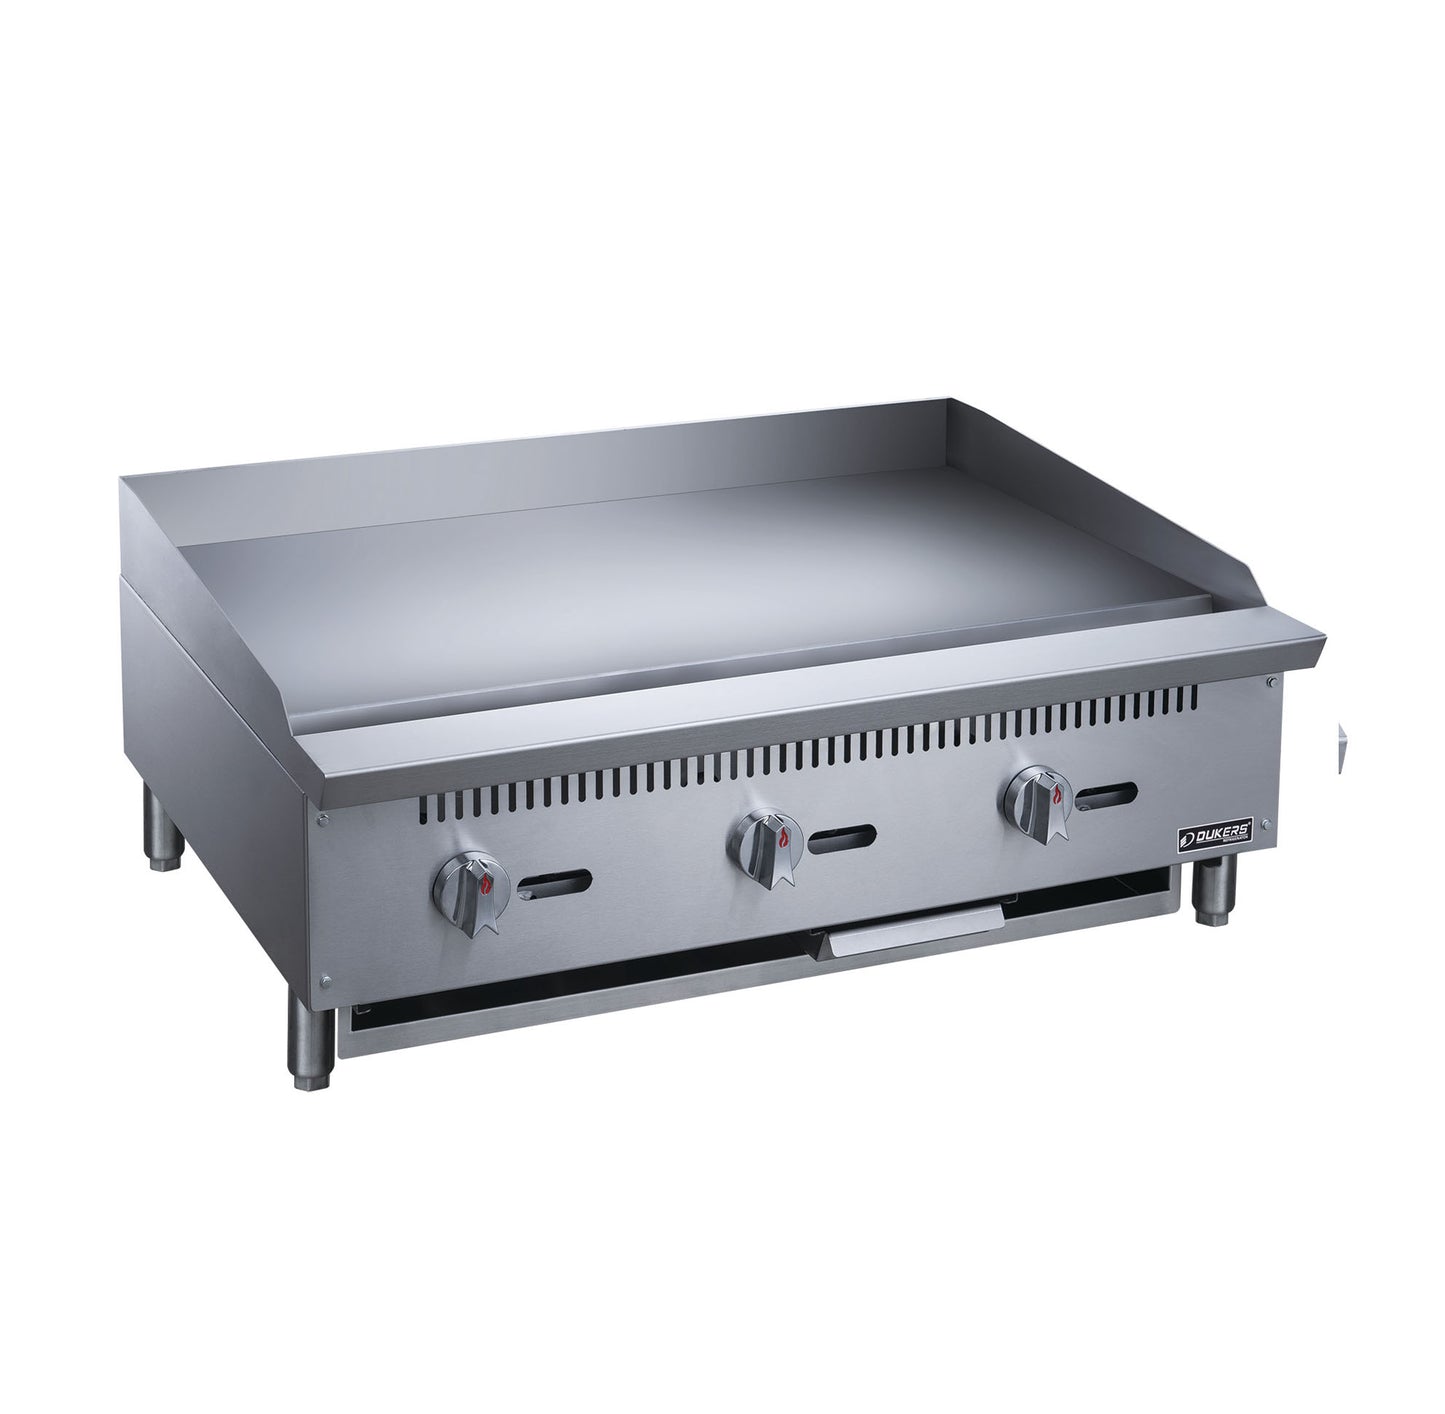 Dukers - DCGM36, Commercial 36" Griddle with 3/4"" Griddle Polished Plate and 3 Burners Natural Gas / Propane